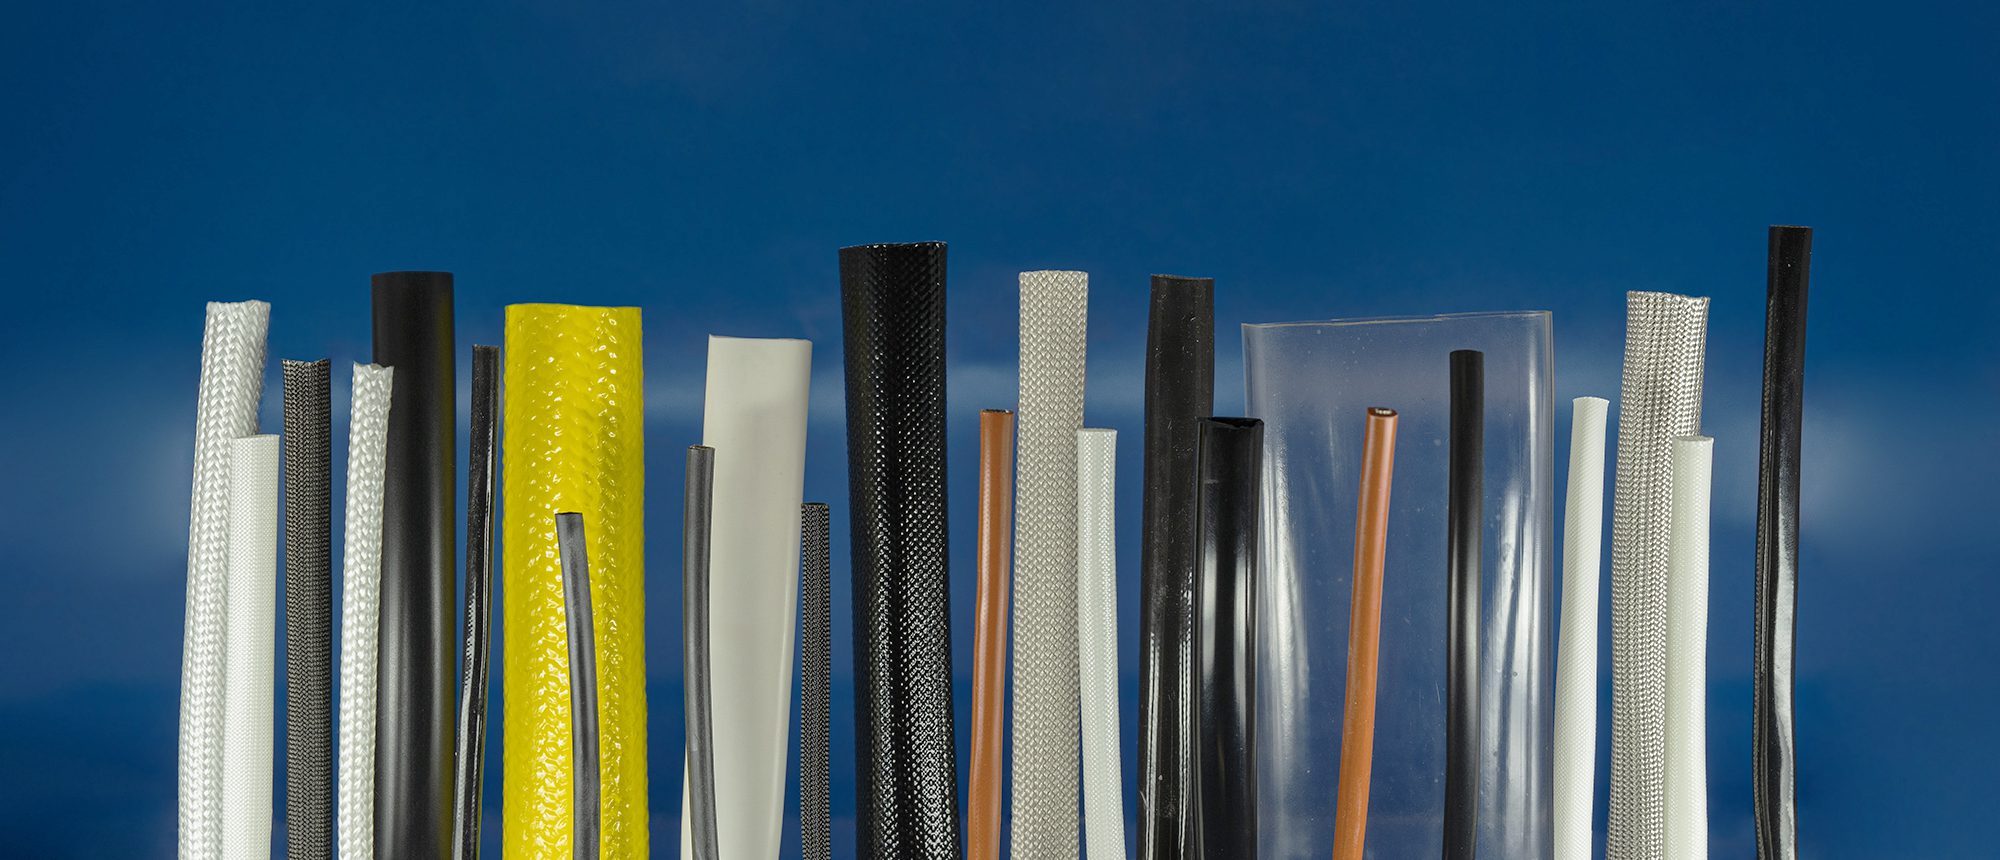 Atkins & Pearce's Electrical Sleeving and Tubing Products